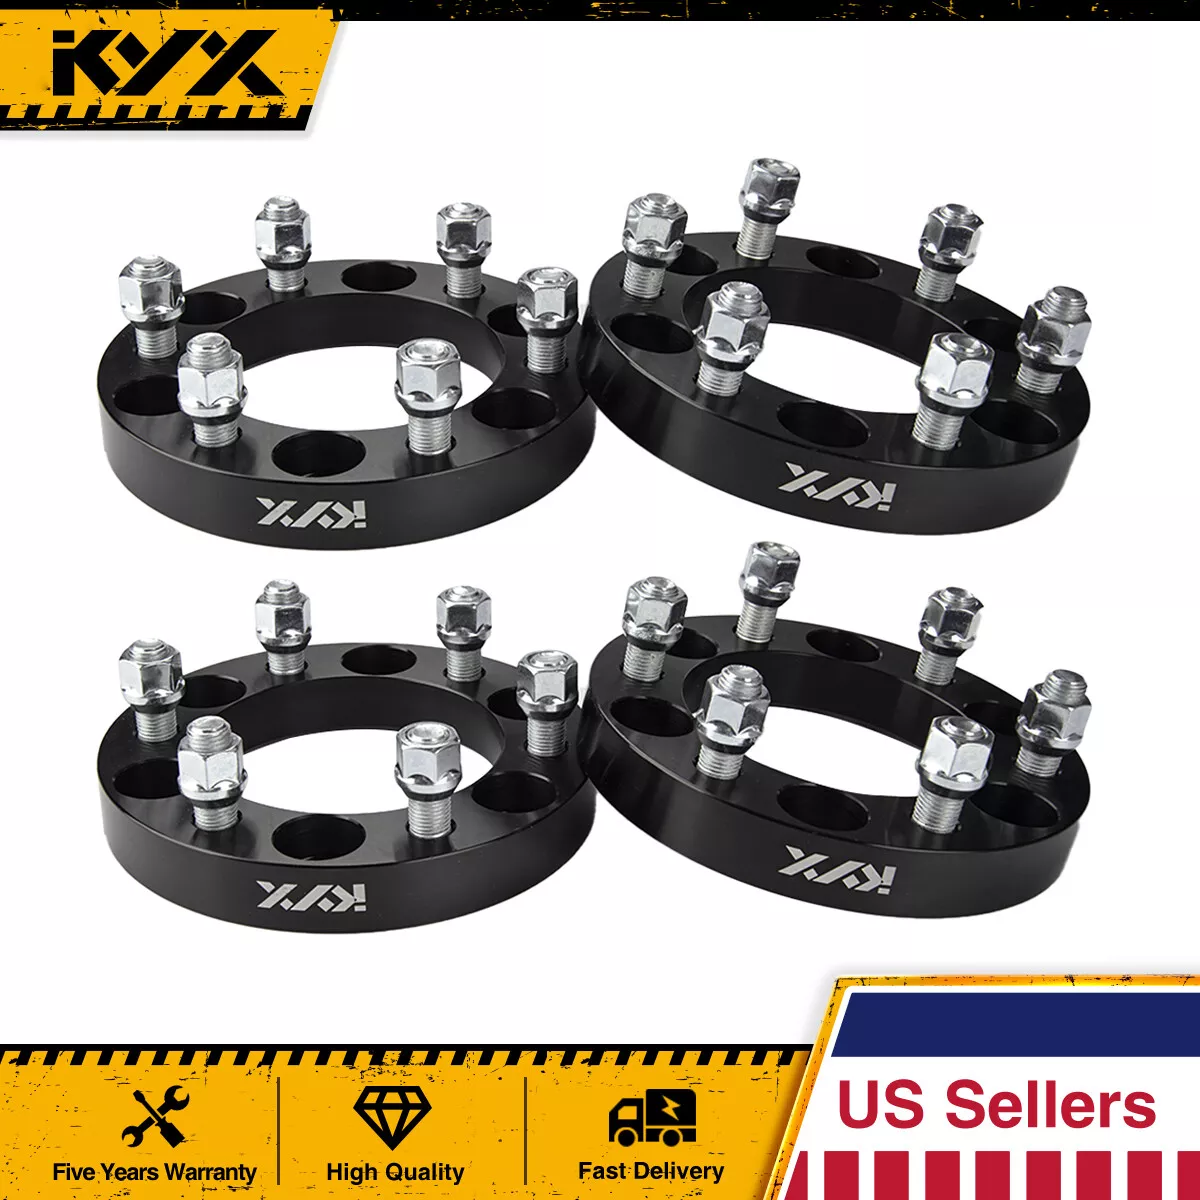 Unique Bargains 4 Pieces 6 Lug 6x5.5 1.25 Thickness Wheel Spacers Adapters  for Cadillac,Chevy 